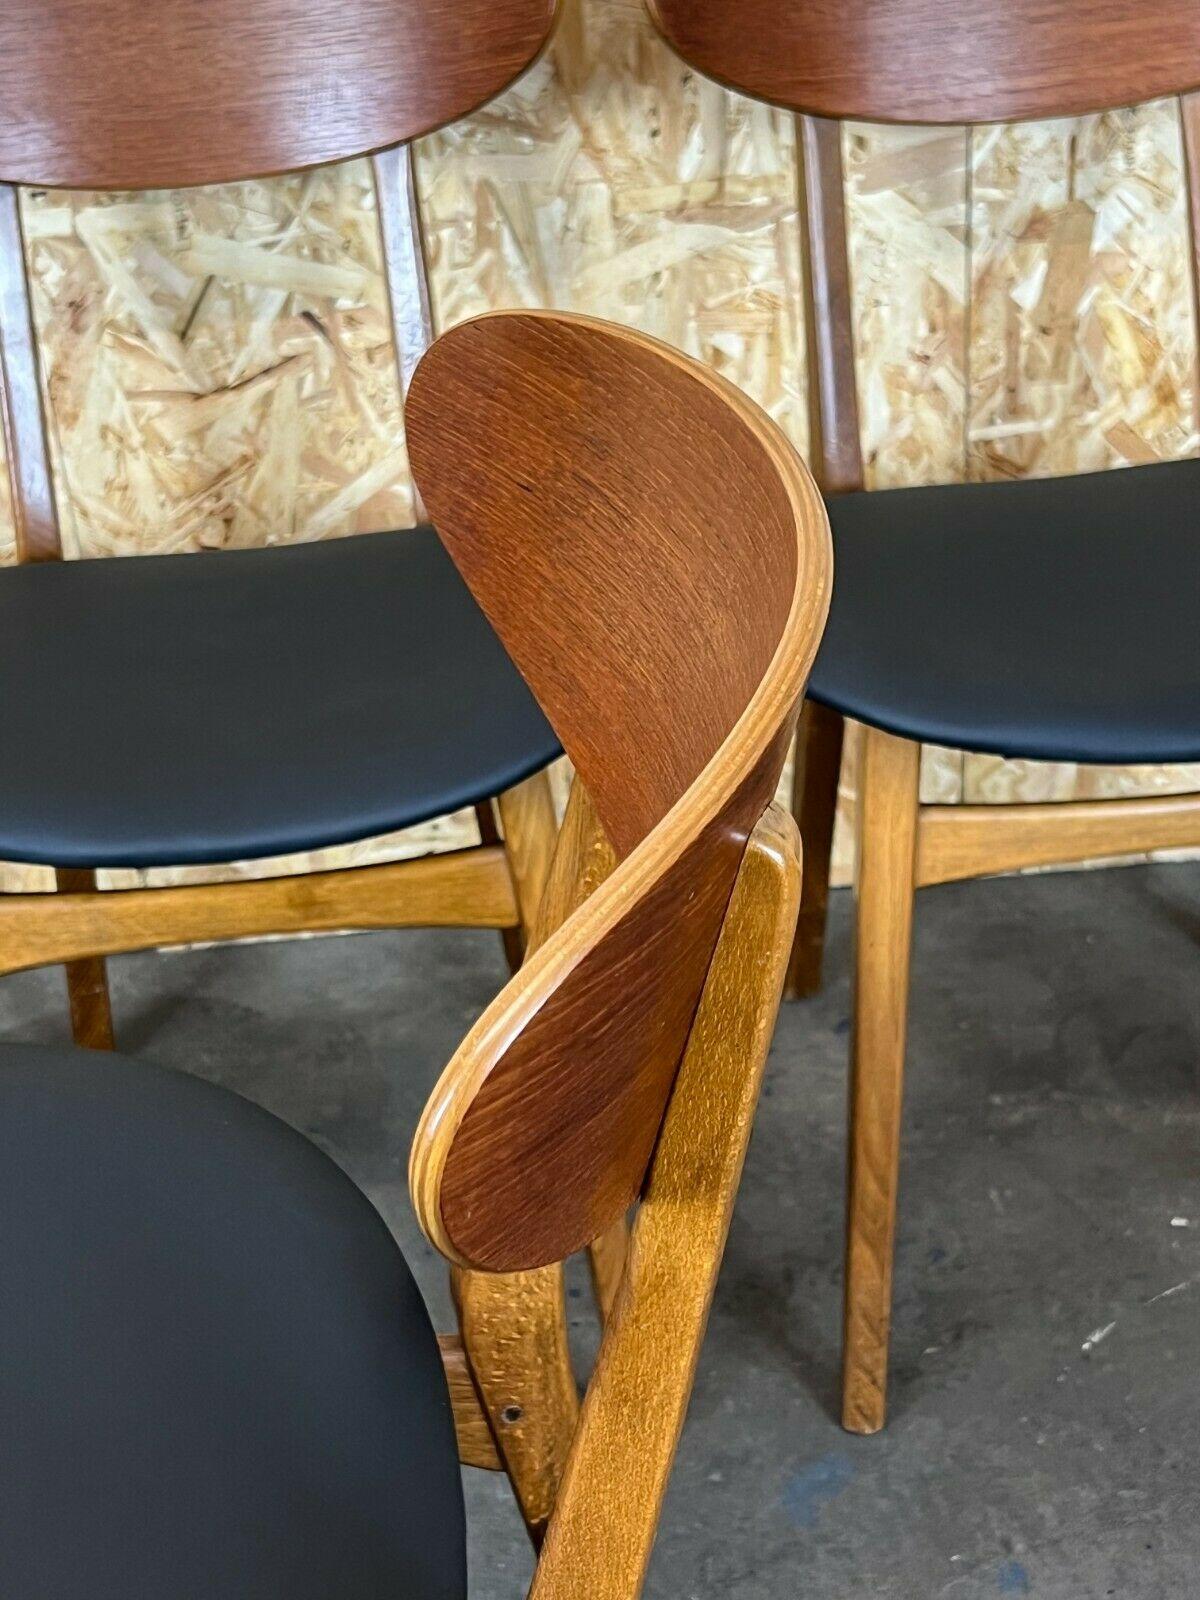 4x 60s 70s Teak Chairs Dining Chair Danish Modern Design 60s For Sale 3